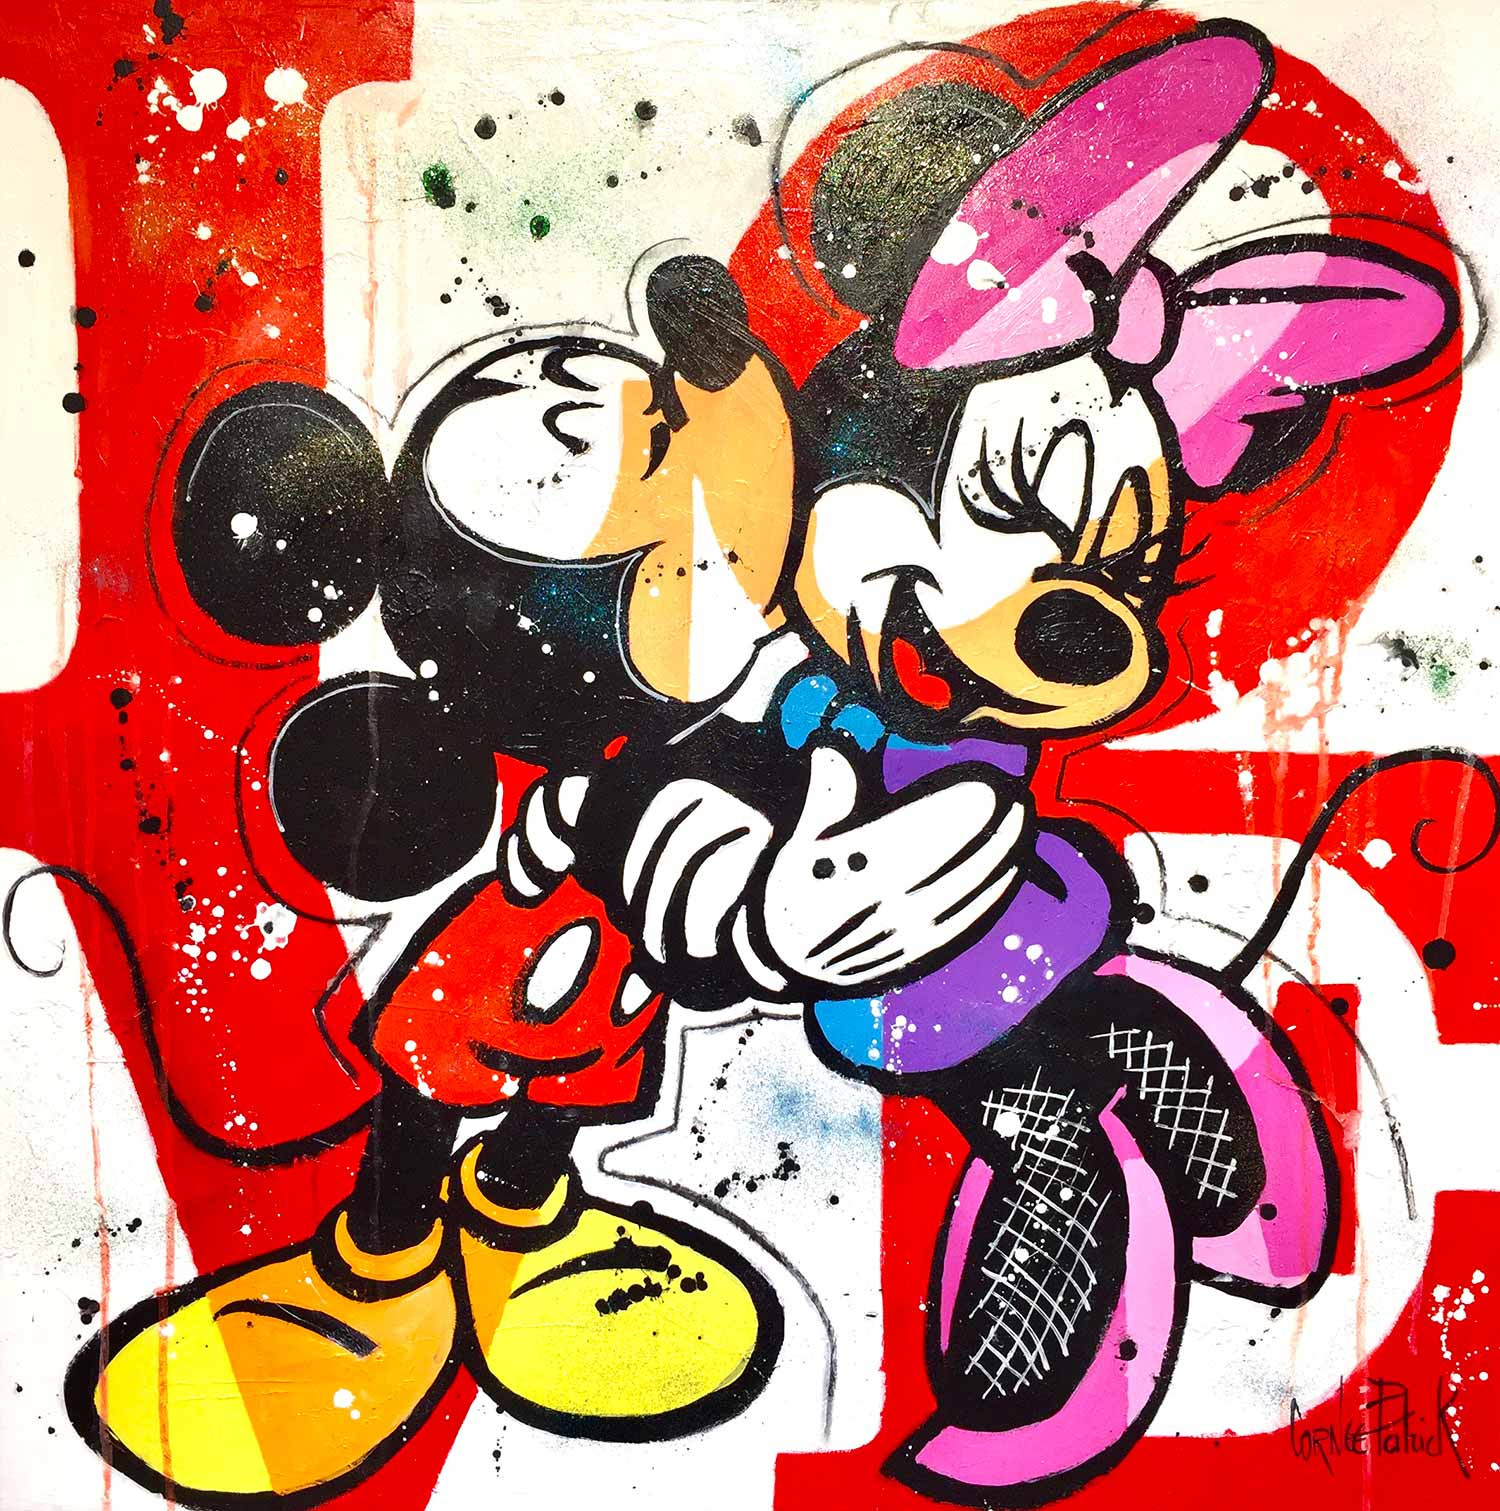 mickey and minnie love drawings